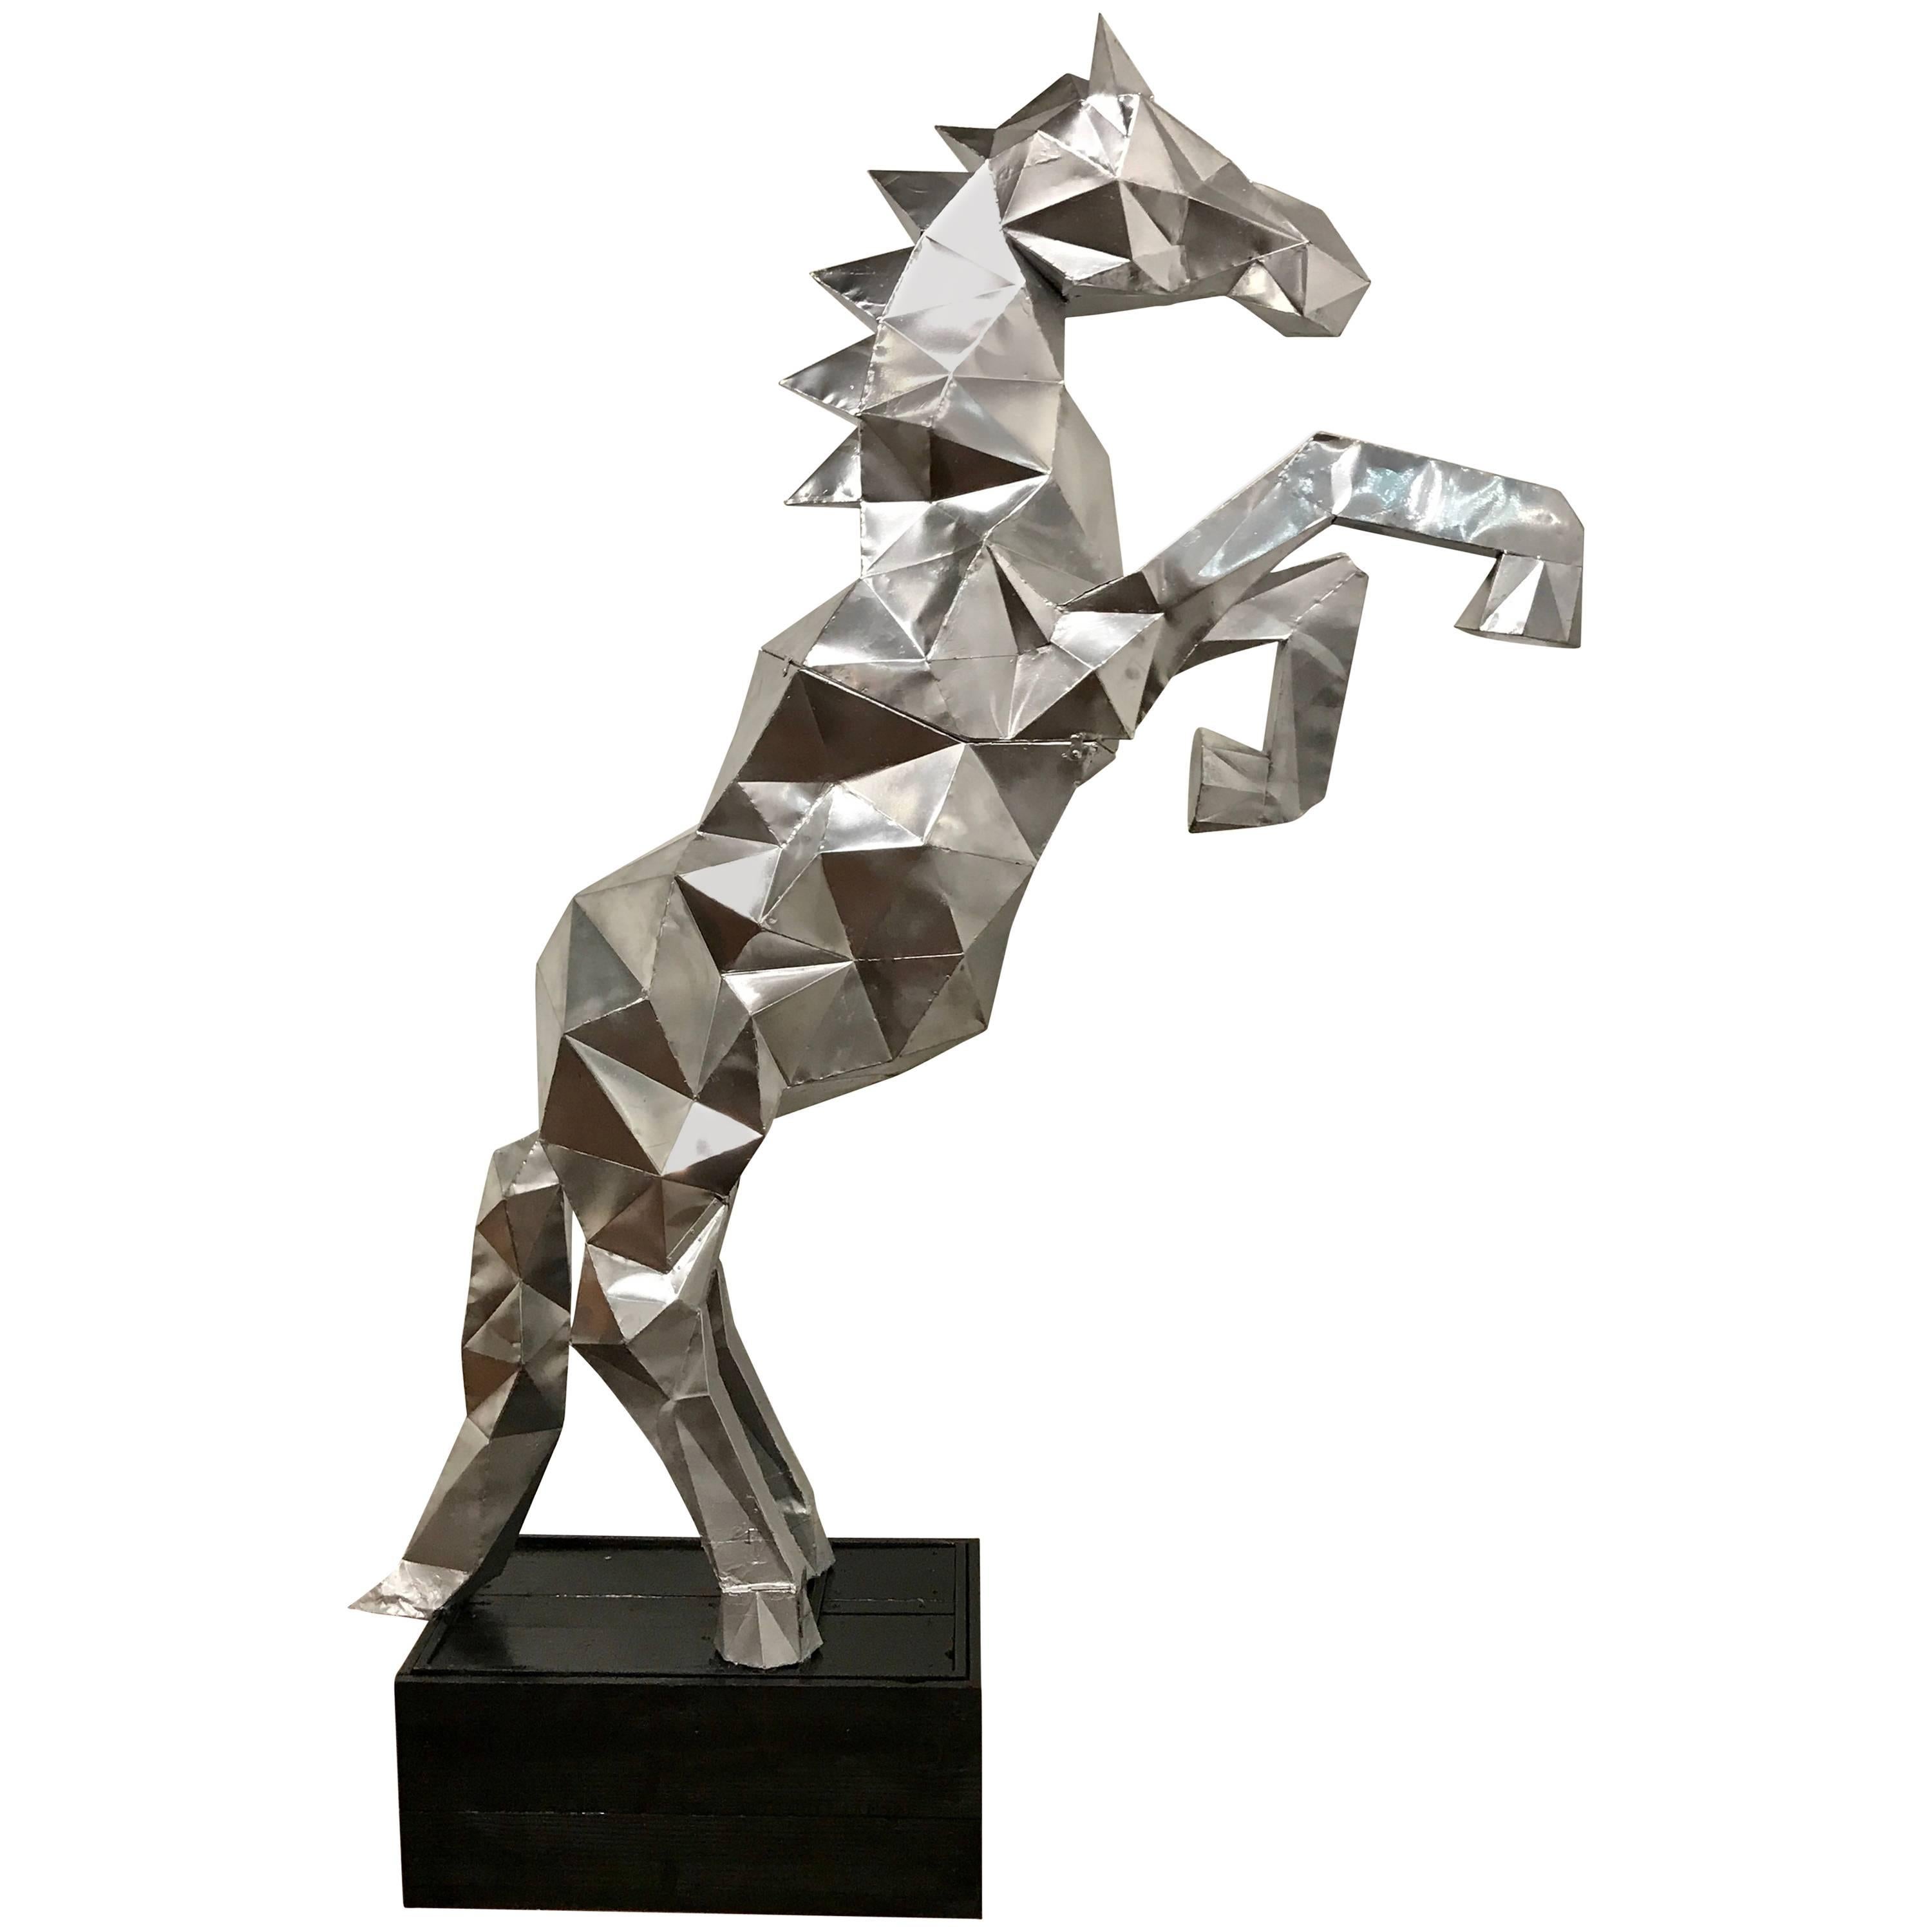 Lifesize Cubist Rearing Horse Sculpture, in the Style of Ben Foster